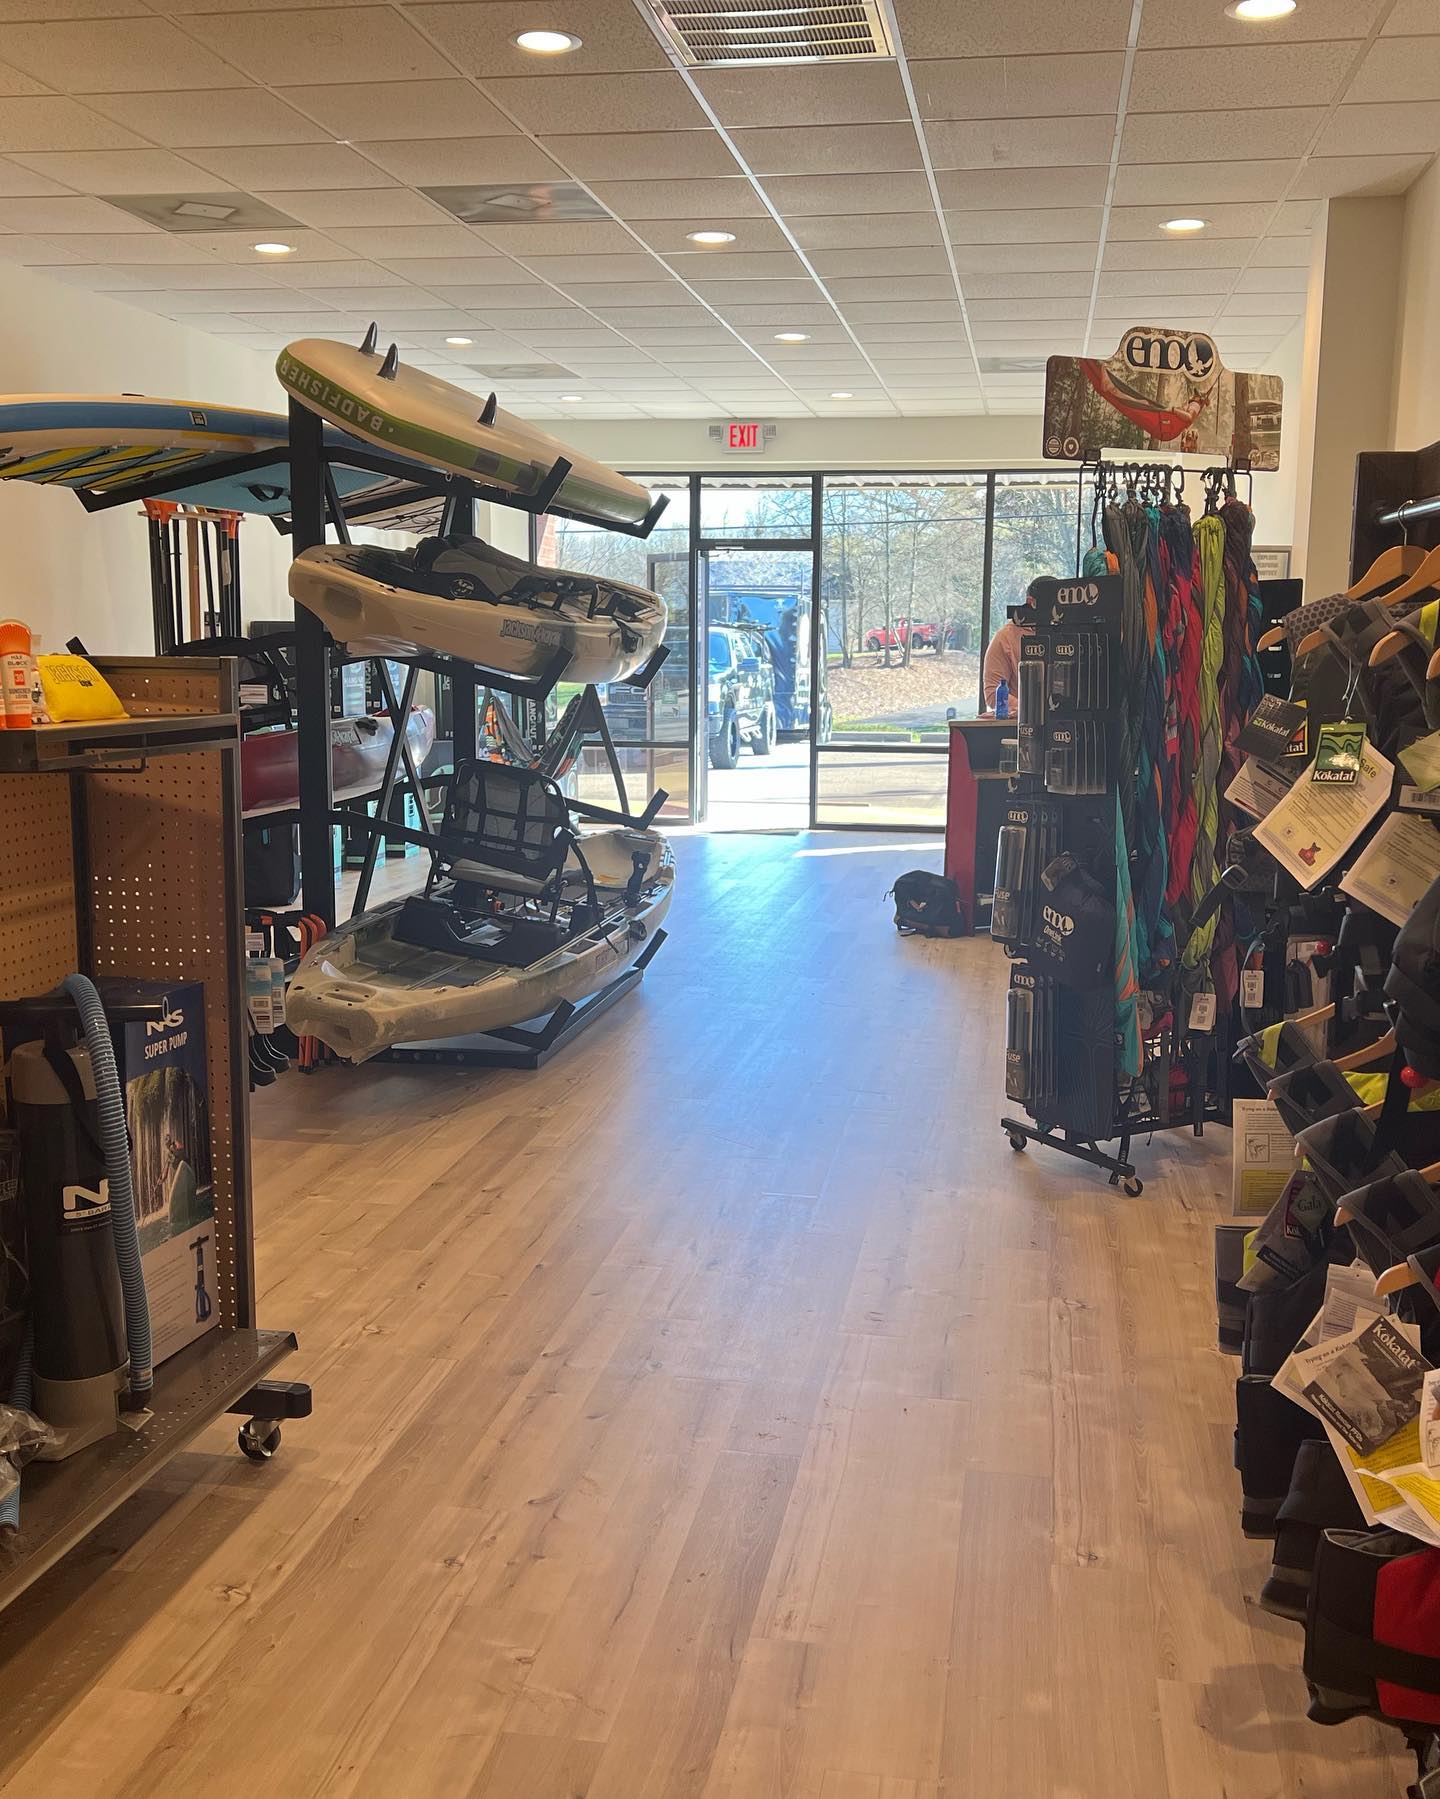 The interior of the Festive Water Paddlesports store